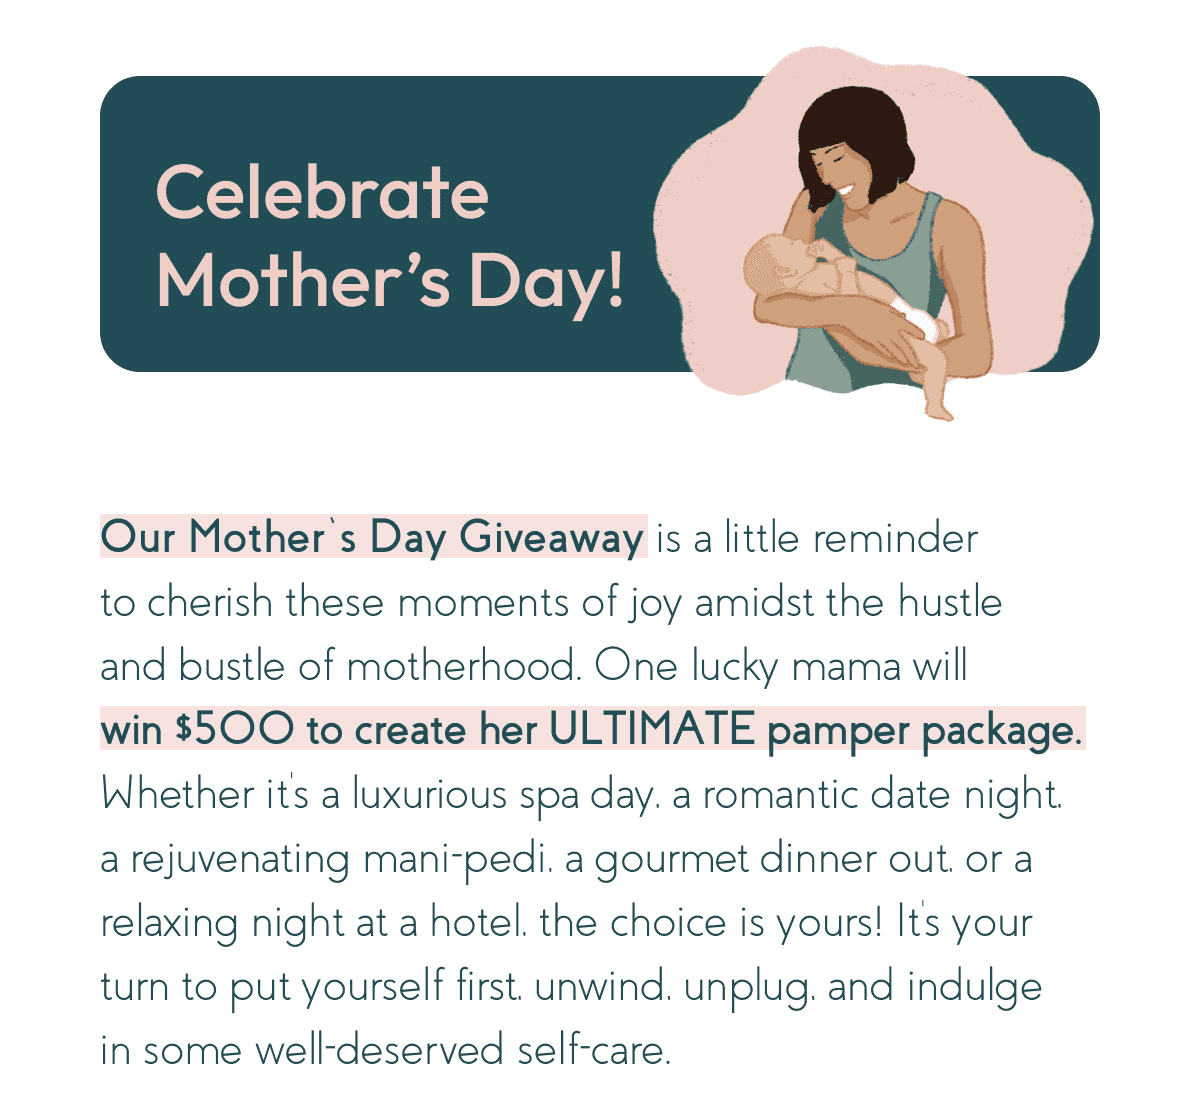 Celebrate Mother's Day!